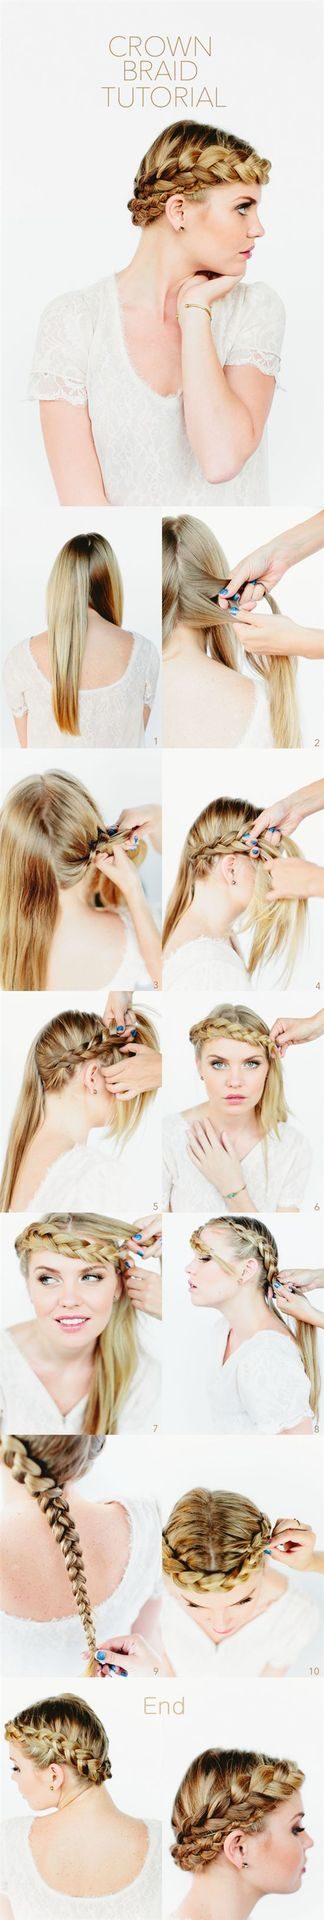 crown-braid-how-to